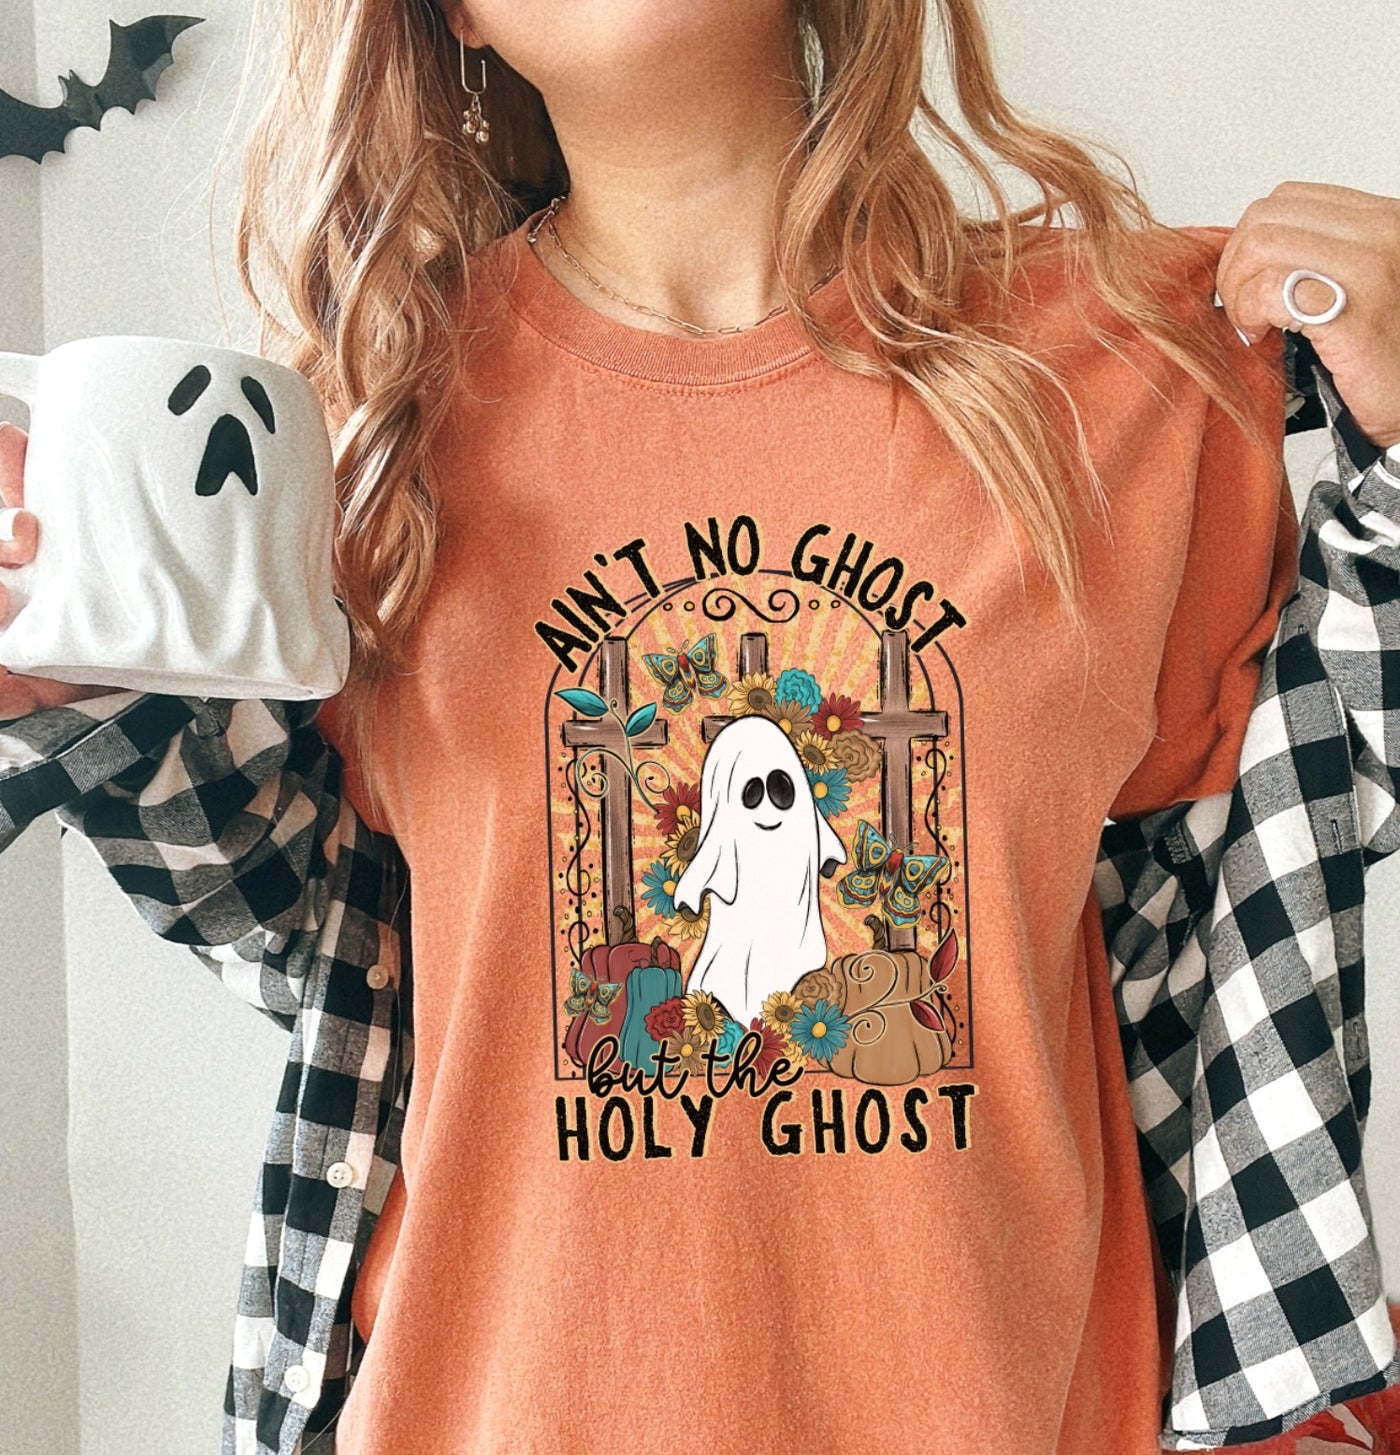 Ain't no ghost but the Holy Ghost